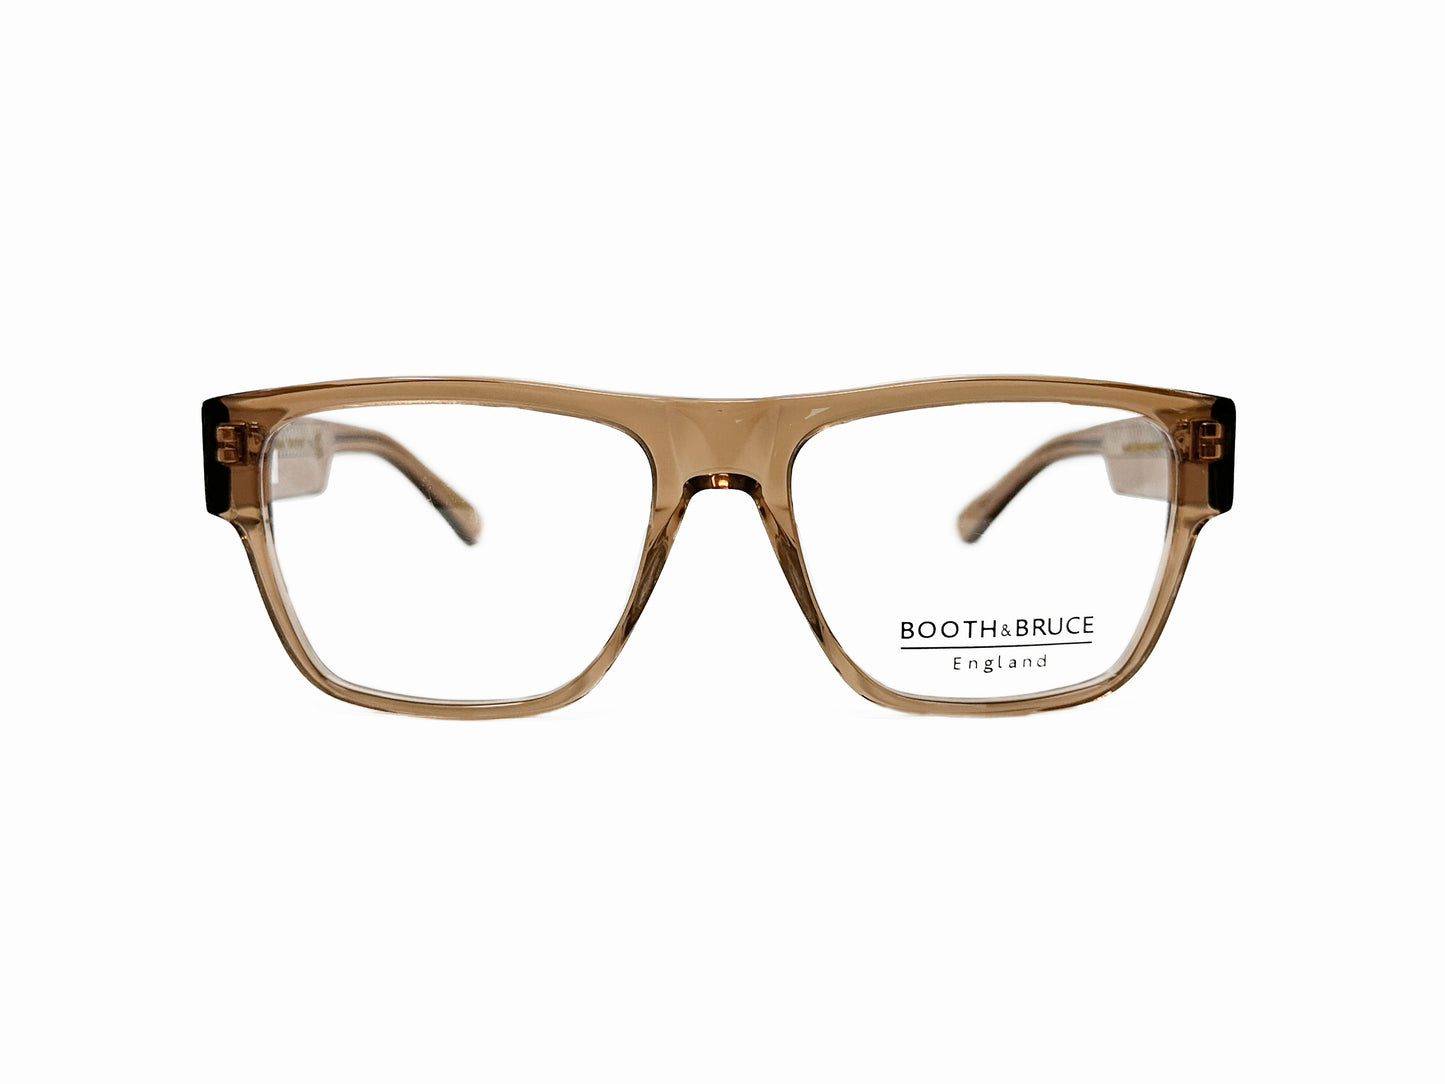 Booth & Bruce rectangular acetate optical frame with raised bridge. Model: BB2207. Color: Marmalade - Semi-transparent brown. Front view. 